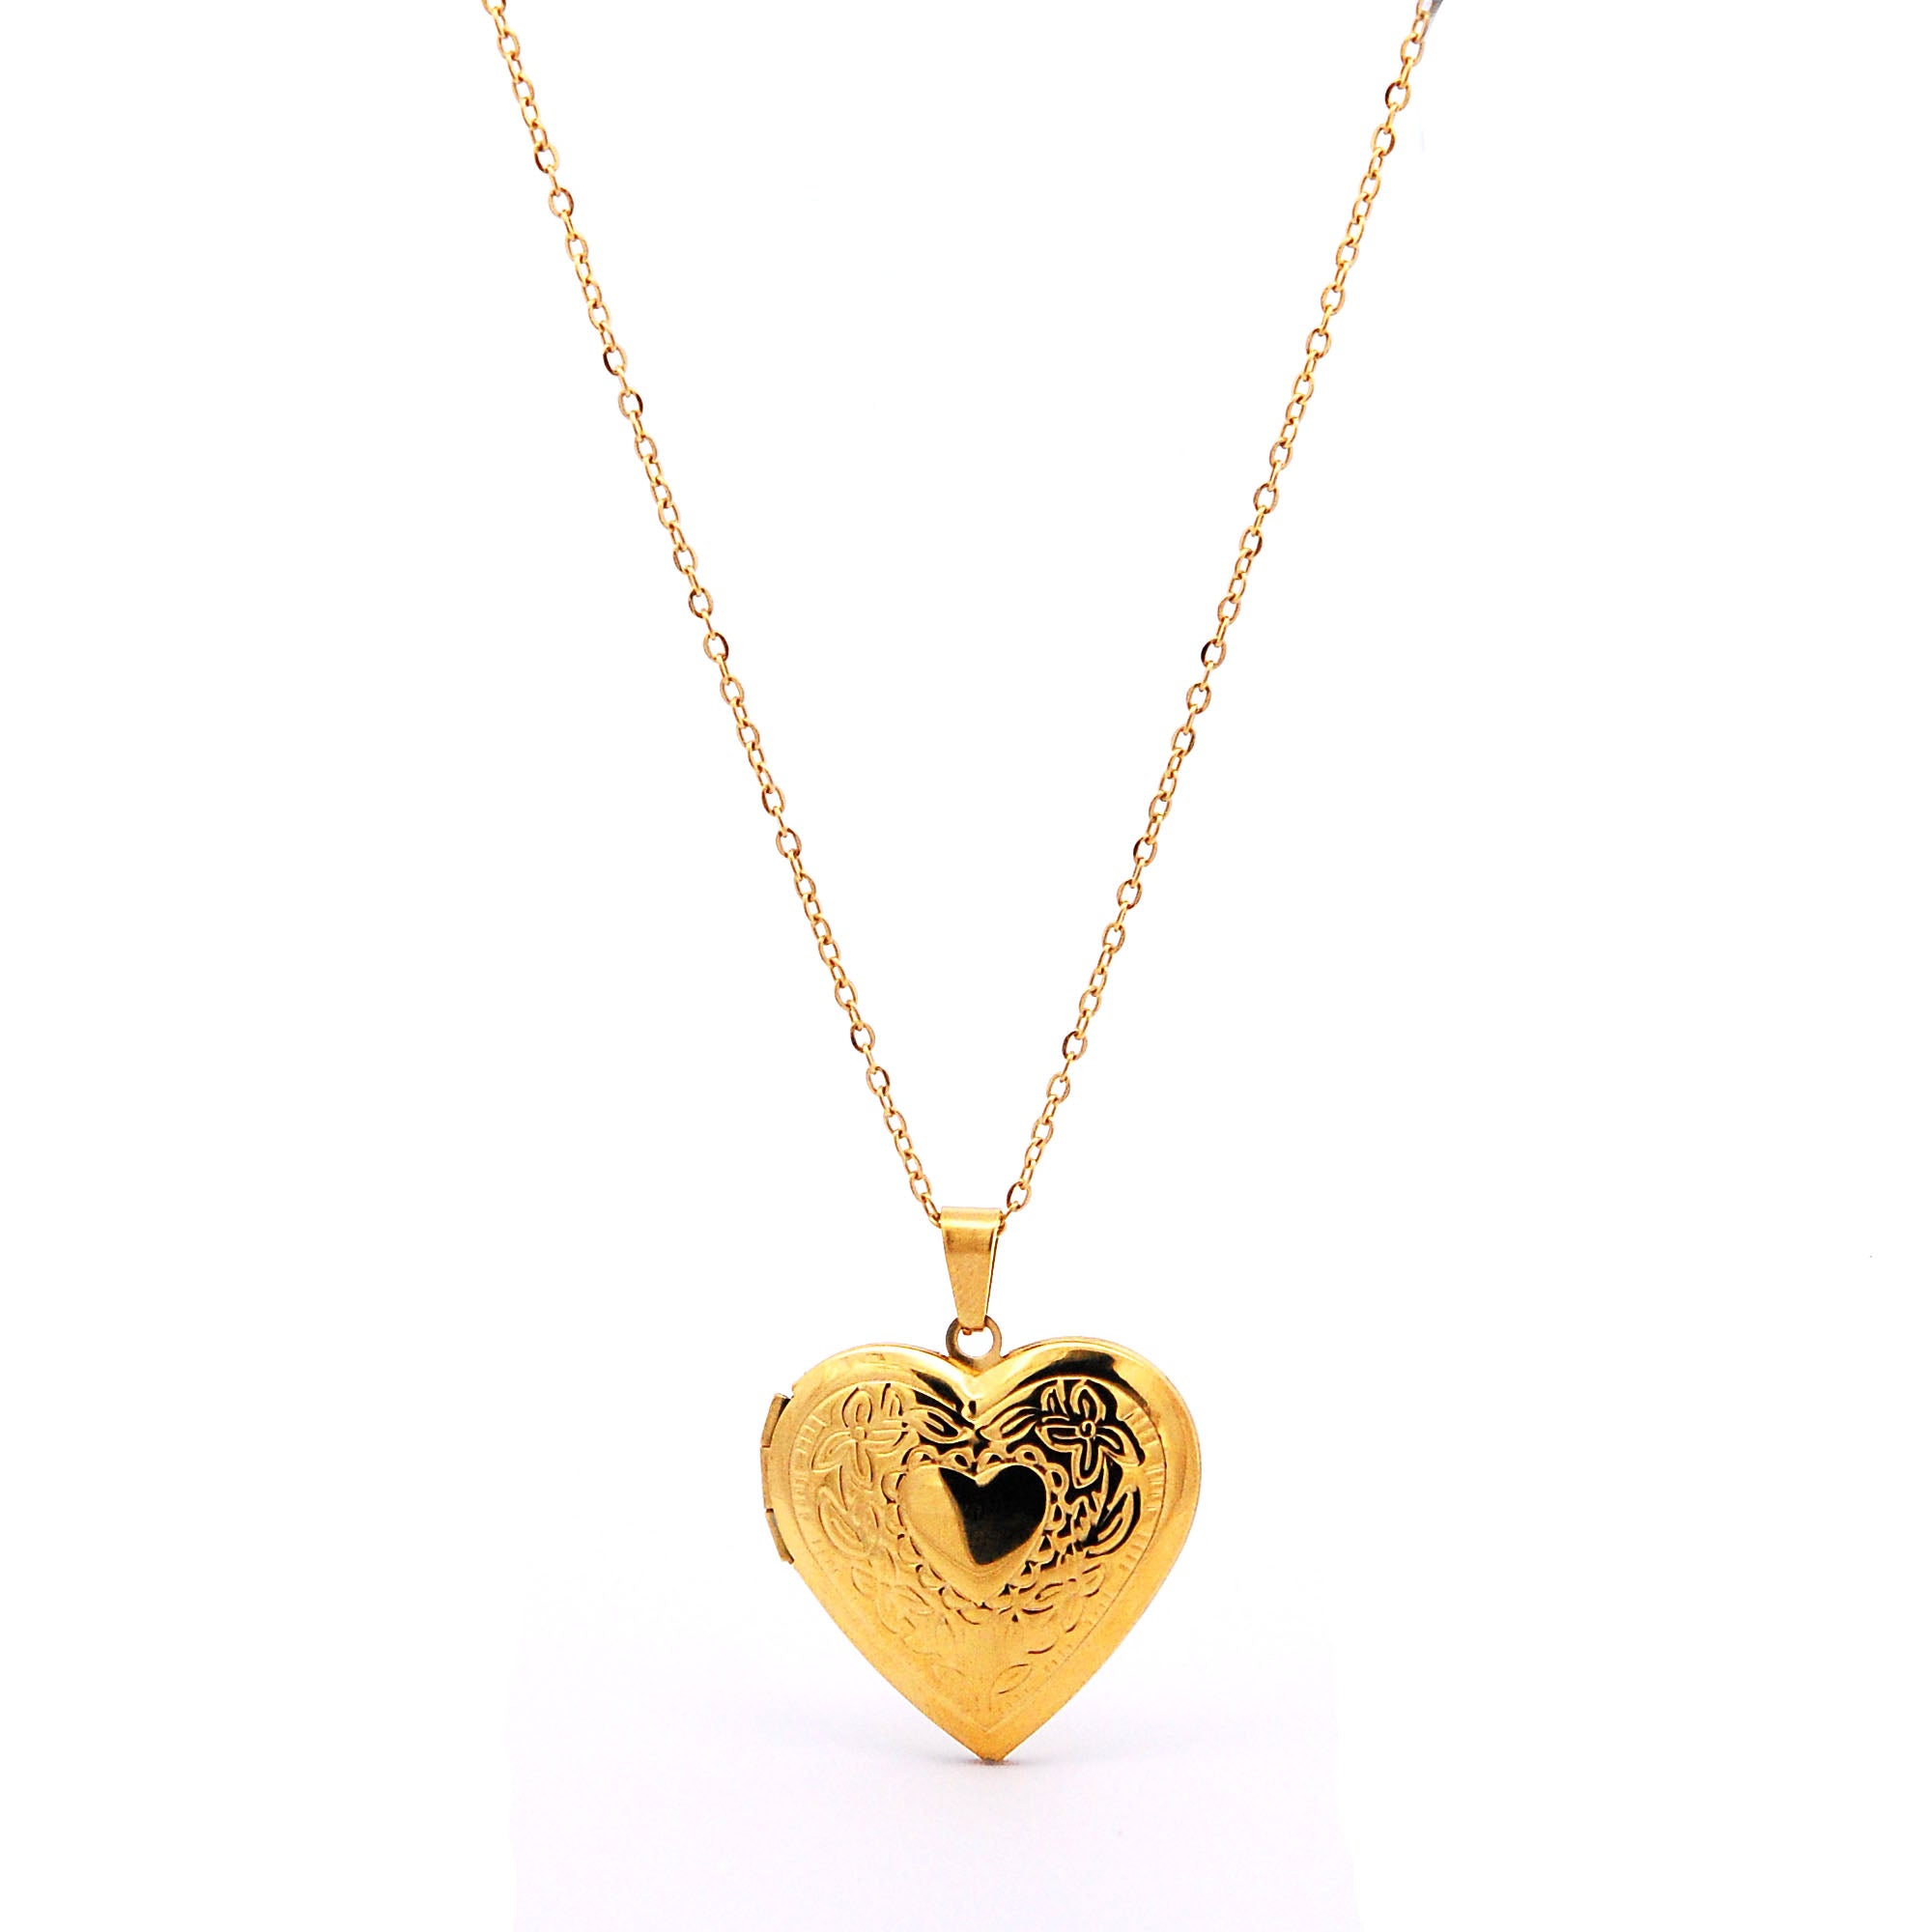 ESN 7657: All IPG XL Decorated Secret Heart Locket Necklace (27mm)